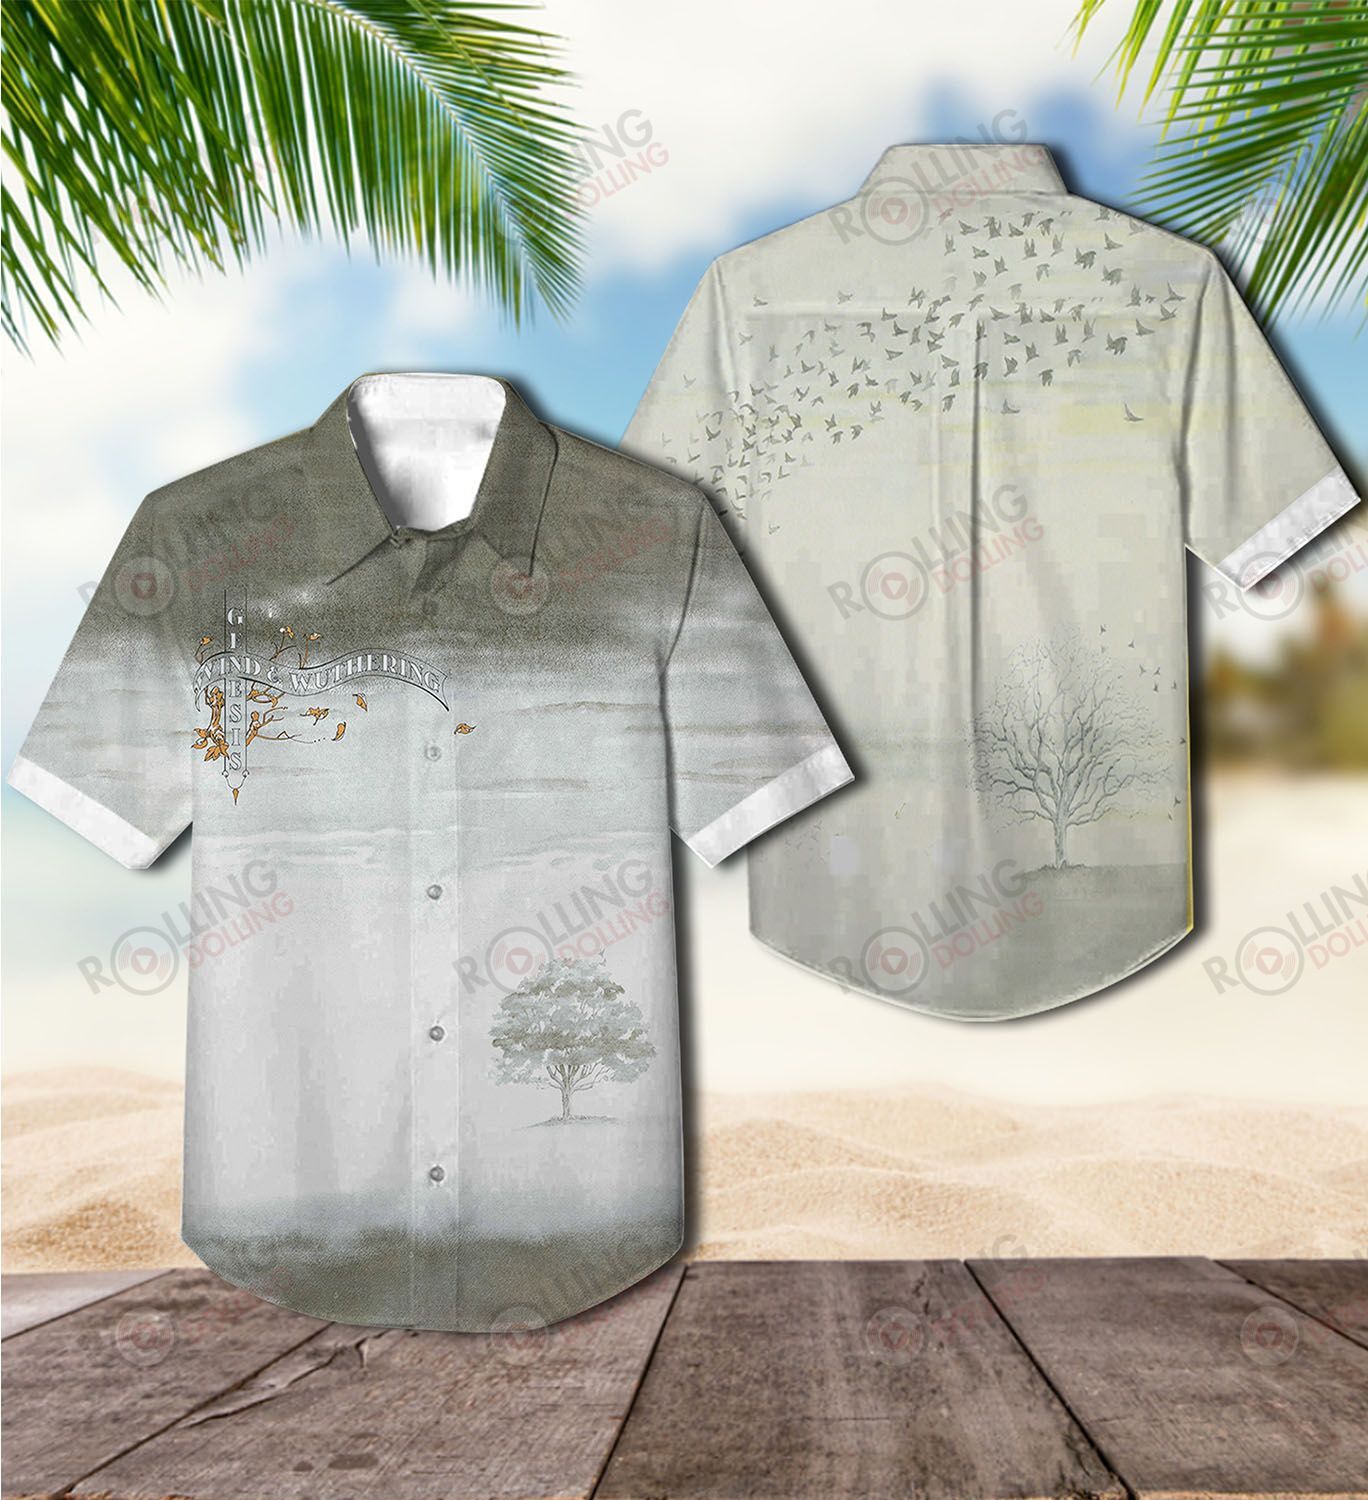 We have compiled a list of some of the best Hawaiian shirt that are available 123